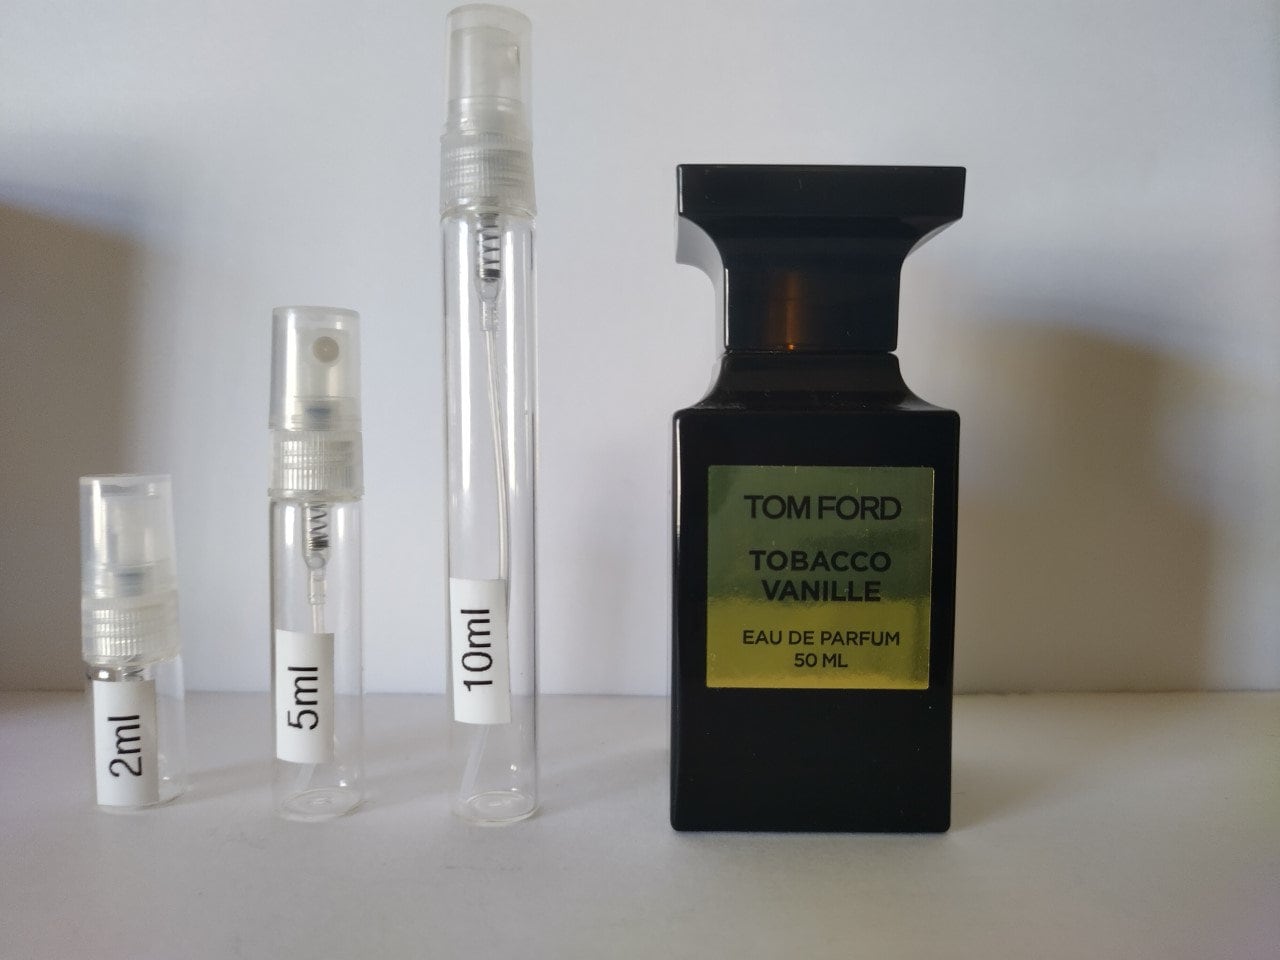 Tom Ford TOBACCO VANILLE